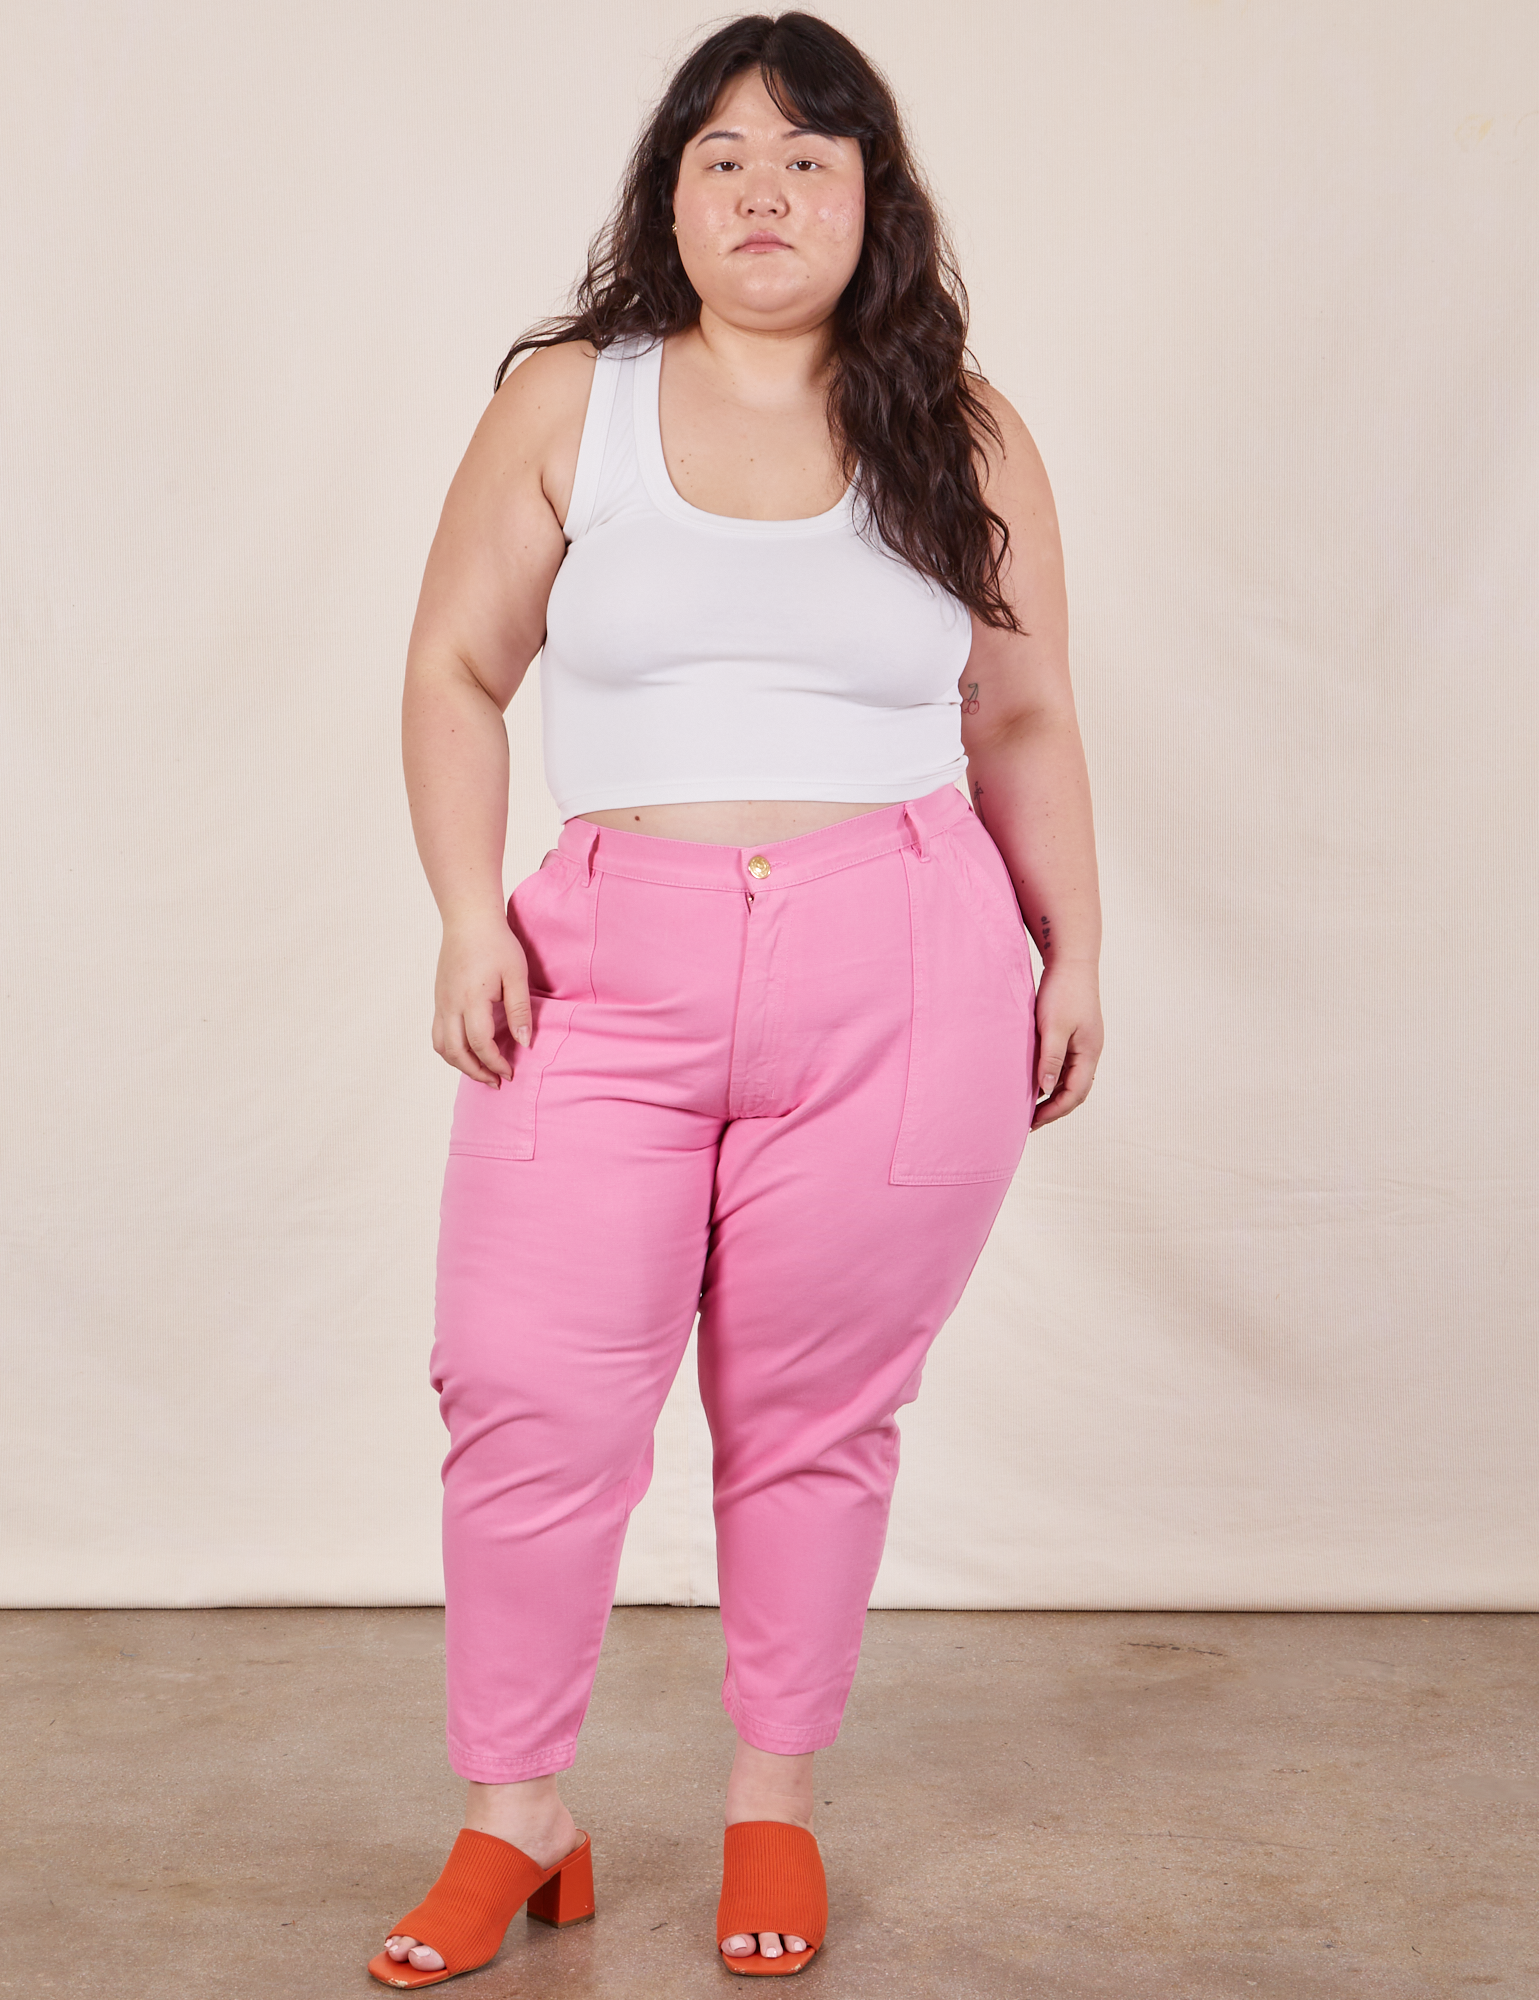 Ashley is 5'7" and wearing 1XL Petite Pencil Pants in Bubblegum Pink paired with vintage off-white Cropped Tank Top